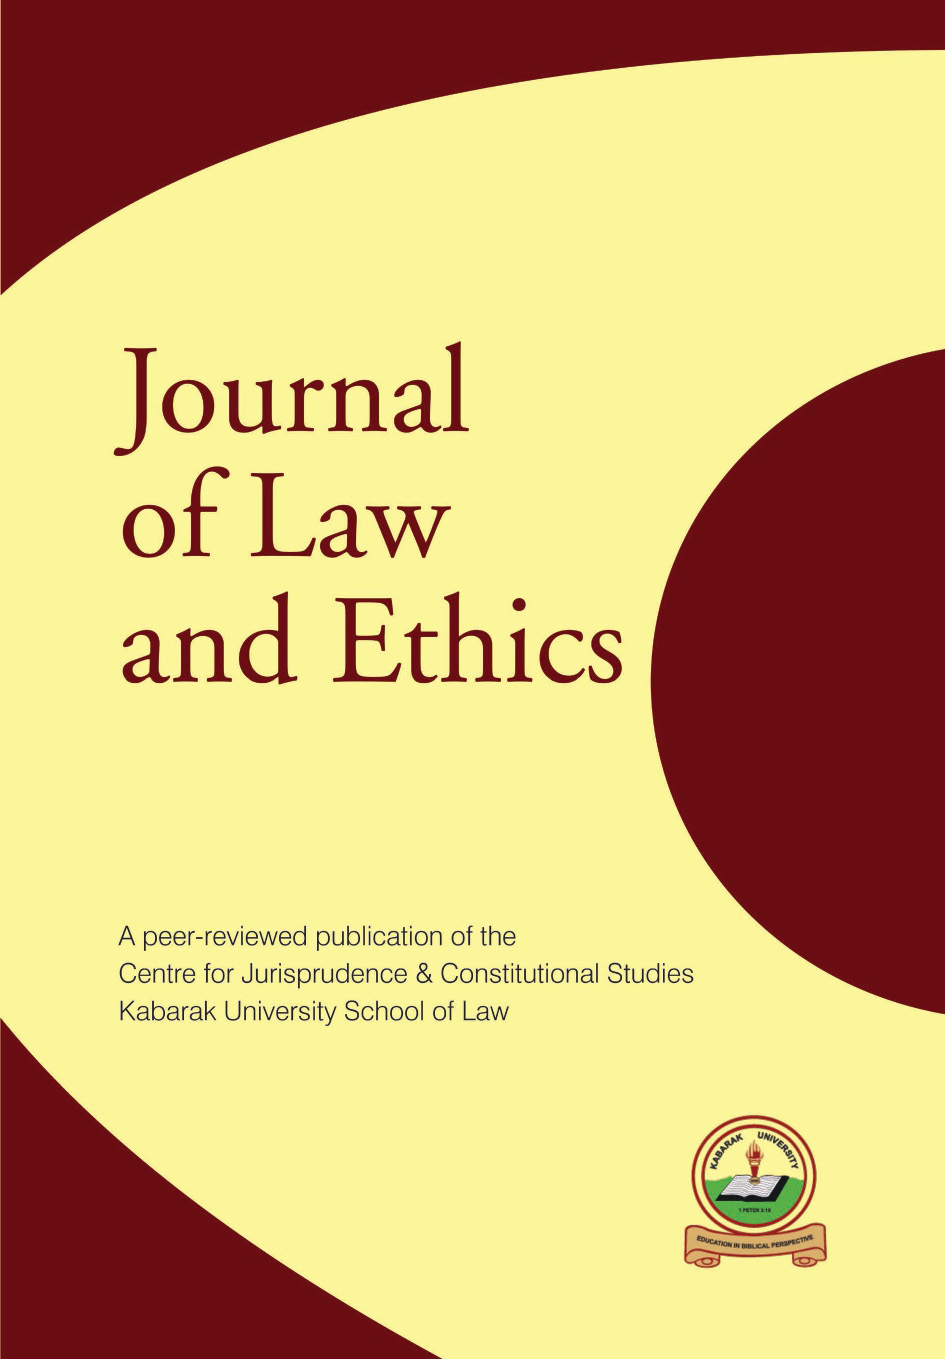 					View Vol. 4 No. 1 (2019): Kabarak Journal of Law and Ethics
				